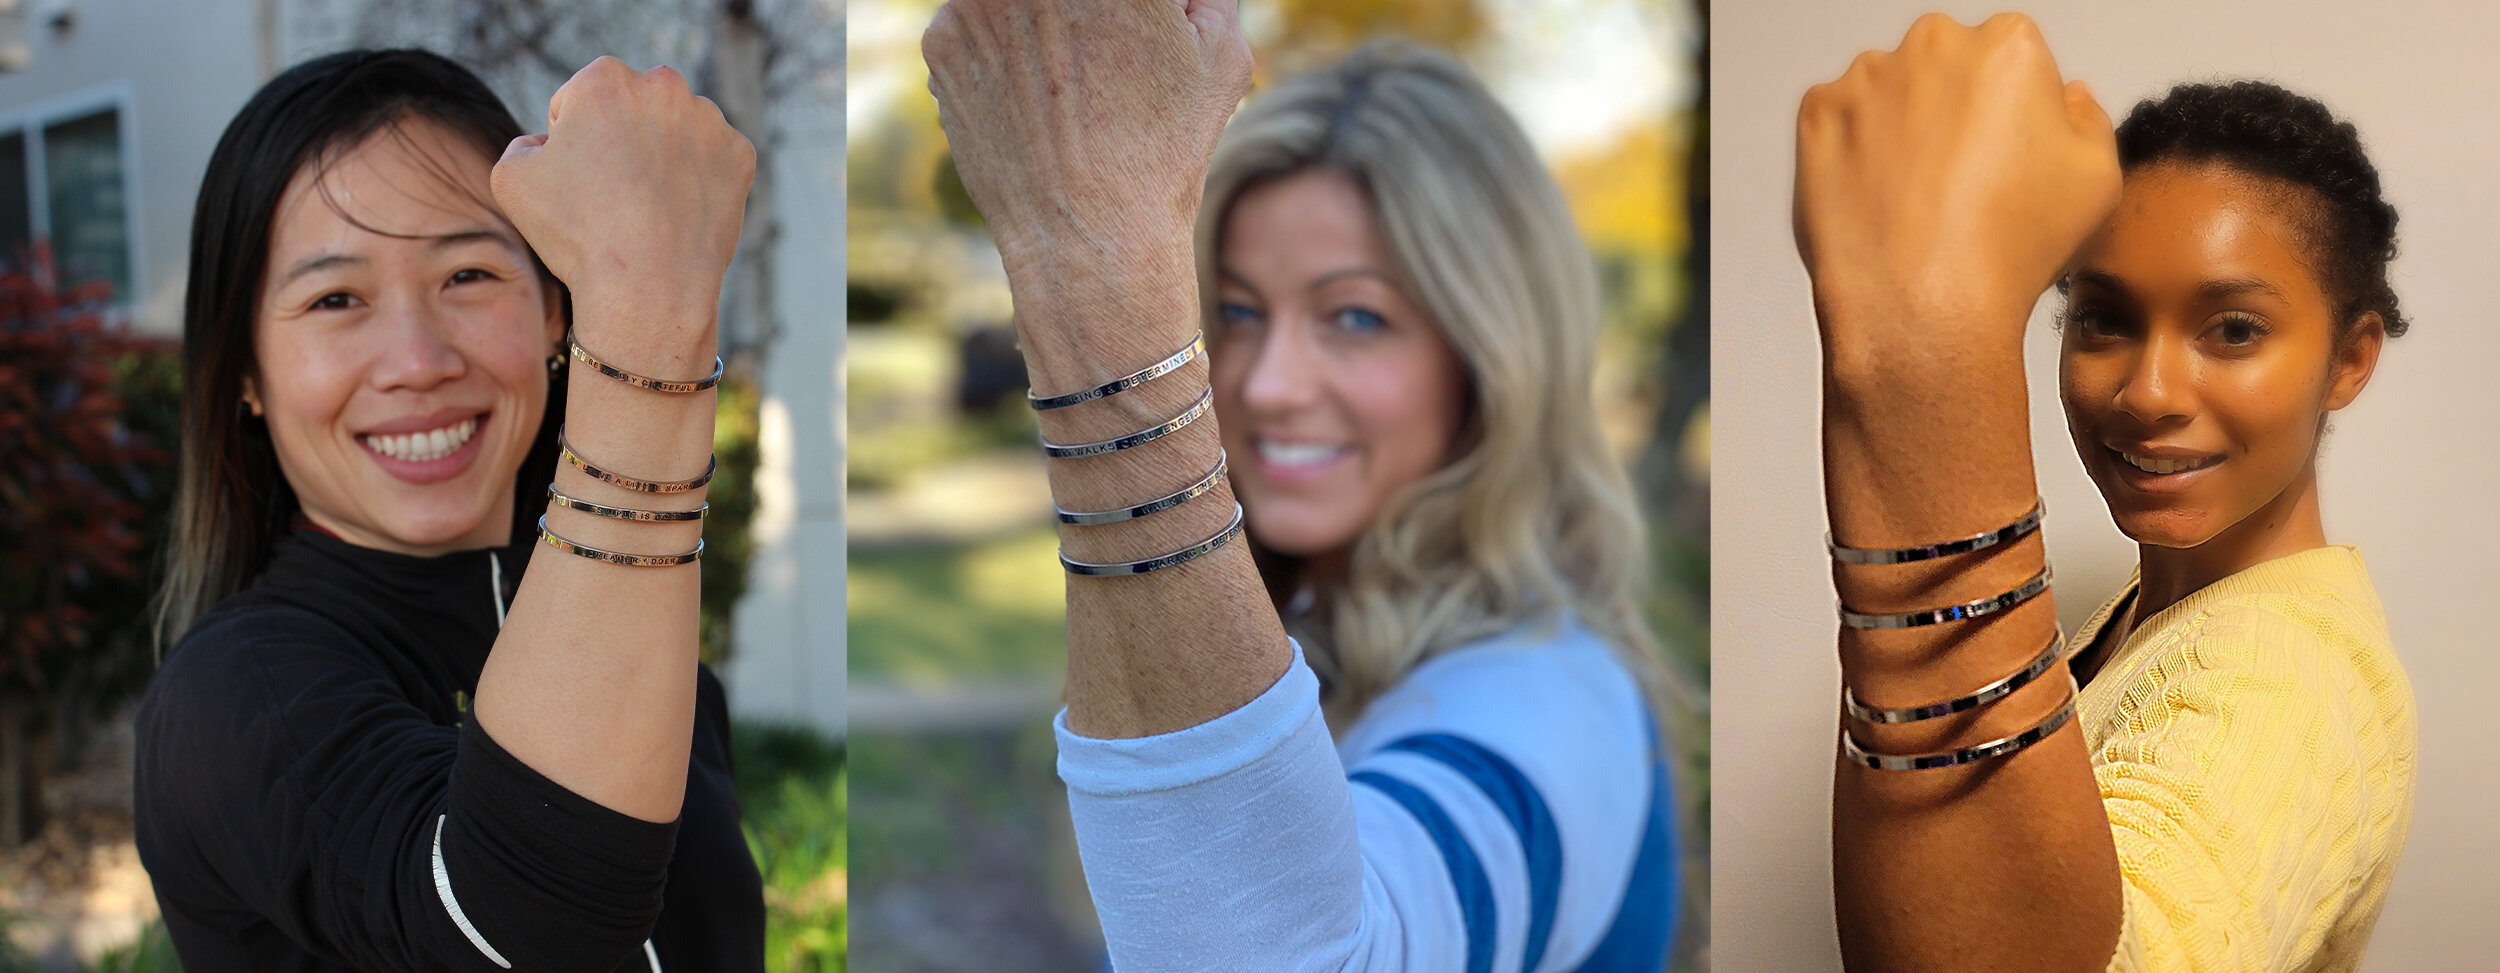   THE FUN AND EASY WAY TO IMPROVE YOUR HEALTH   Here at 99 Walks®, we believe in a world where better health doesn’t have to come at a great cost. That’s why we took our innovative Walking App and added Bracelet Rewards to create a whole new wellness